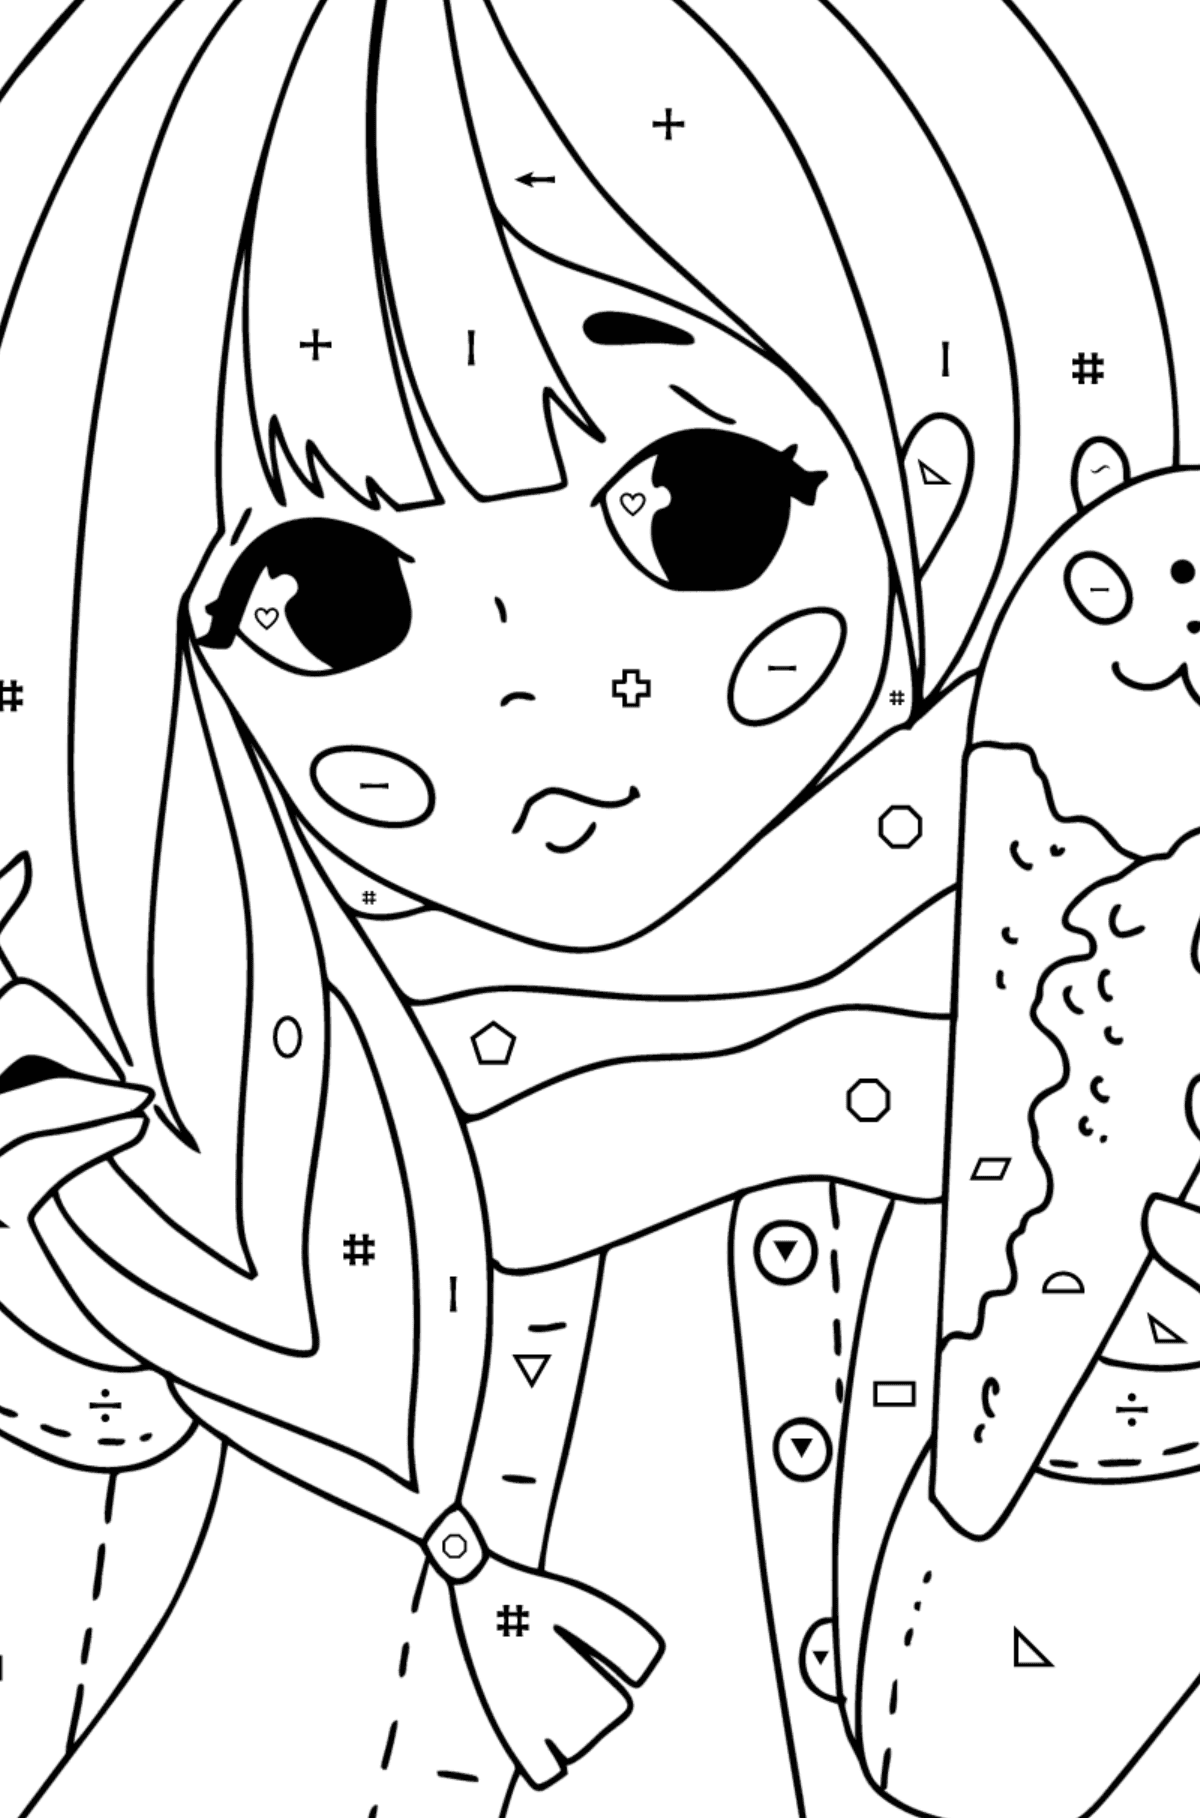 Pretty anime girl coloring page - Coloring by Symbols and Geometric Shapes for Kids